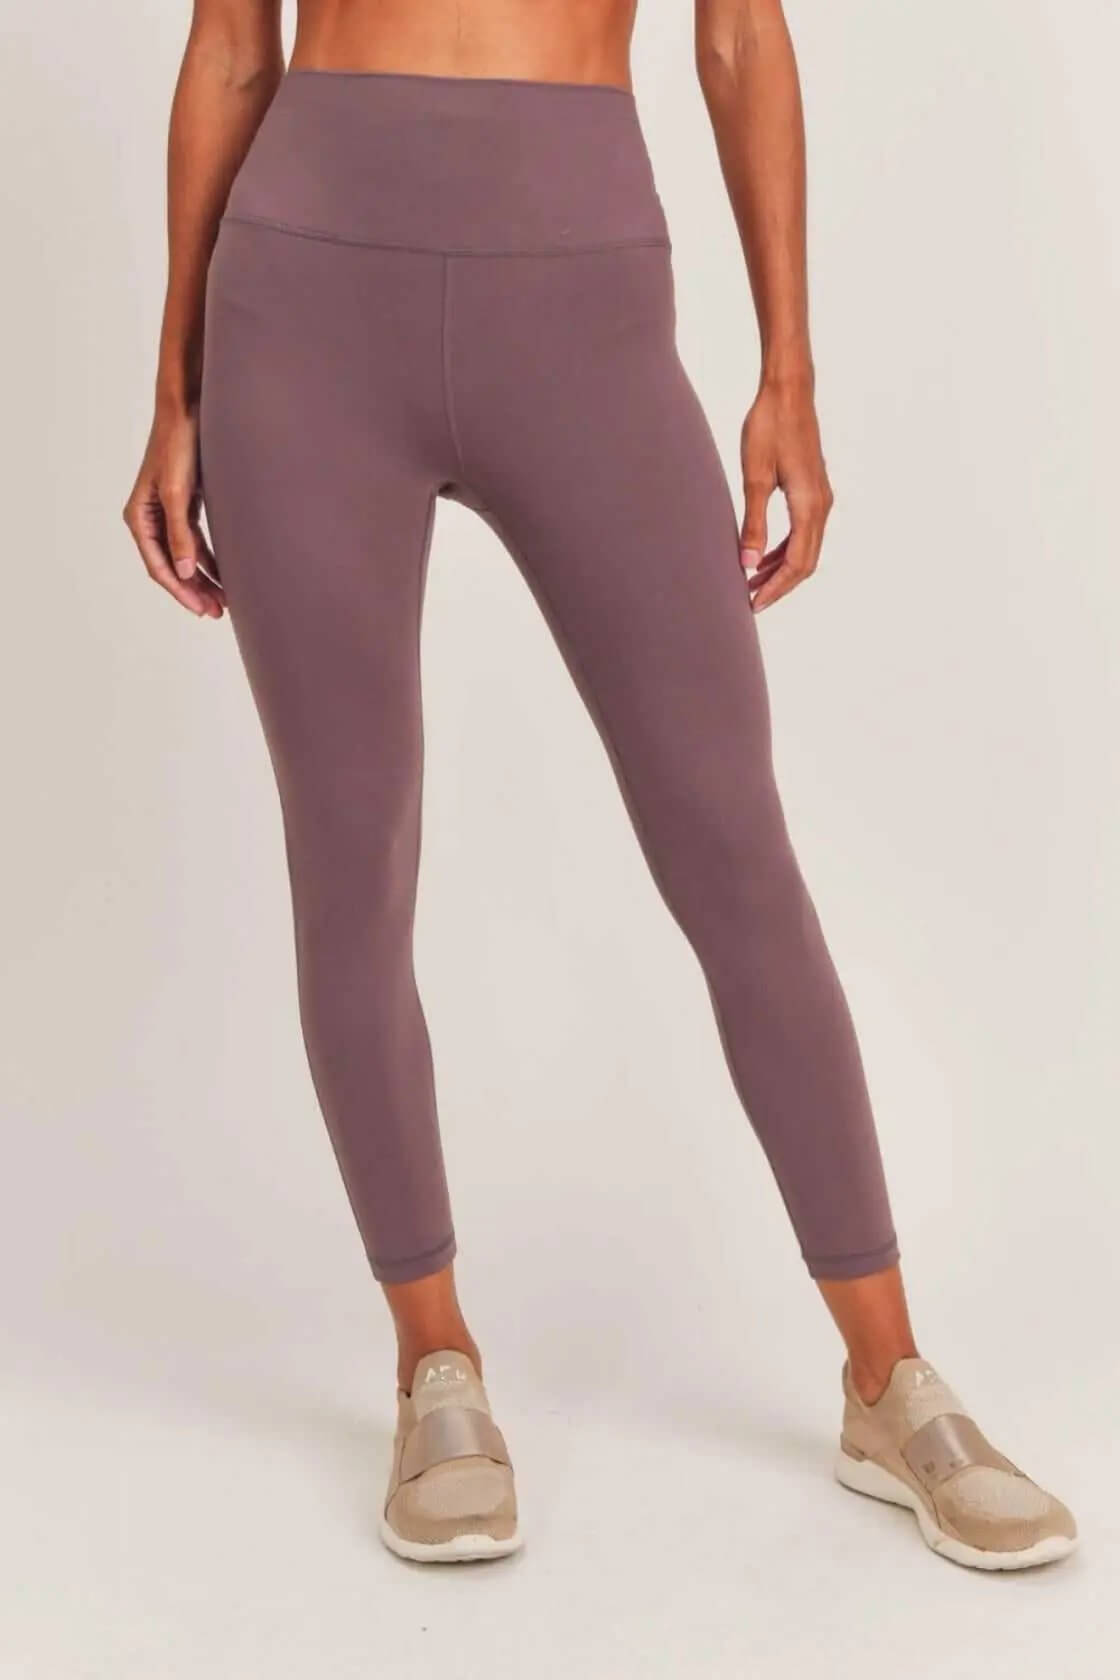 Solid Ankle Length Leggings With Back Pockets - Mono B